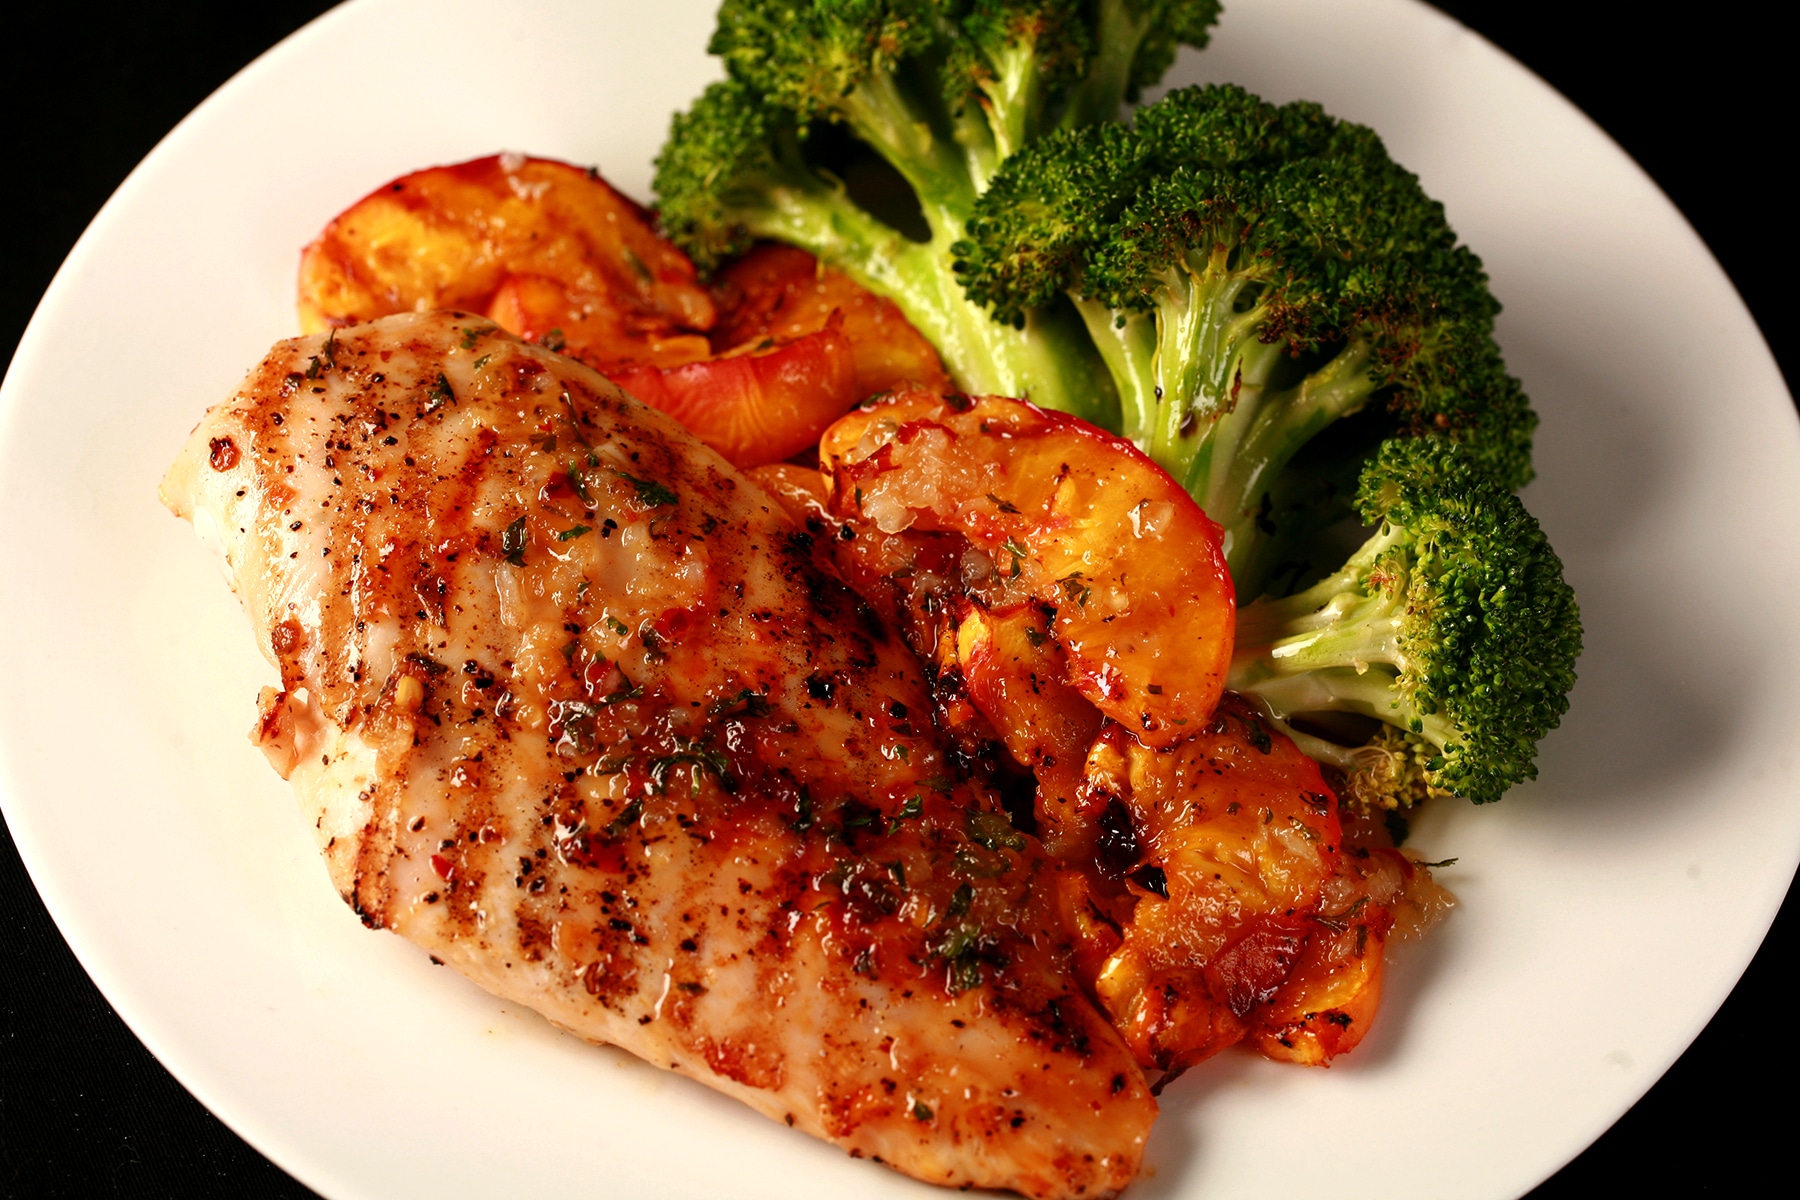 Image of a plate of food: 1 grilled Southern Comfort glazed chicken breast - visibly seasoned - grilled peach slices, and broccoli